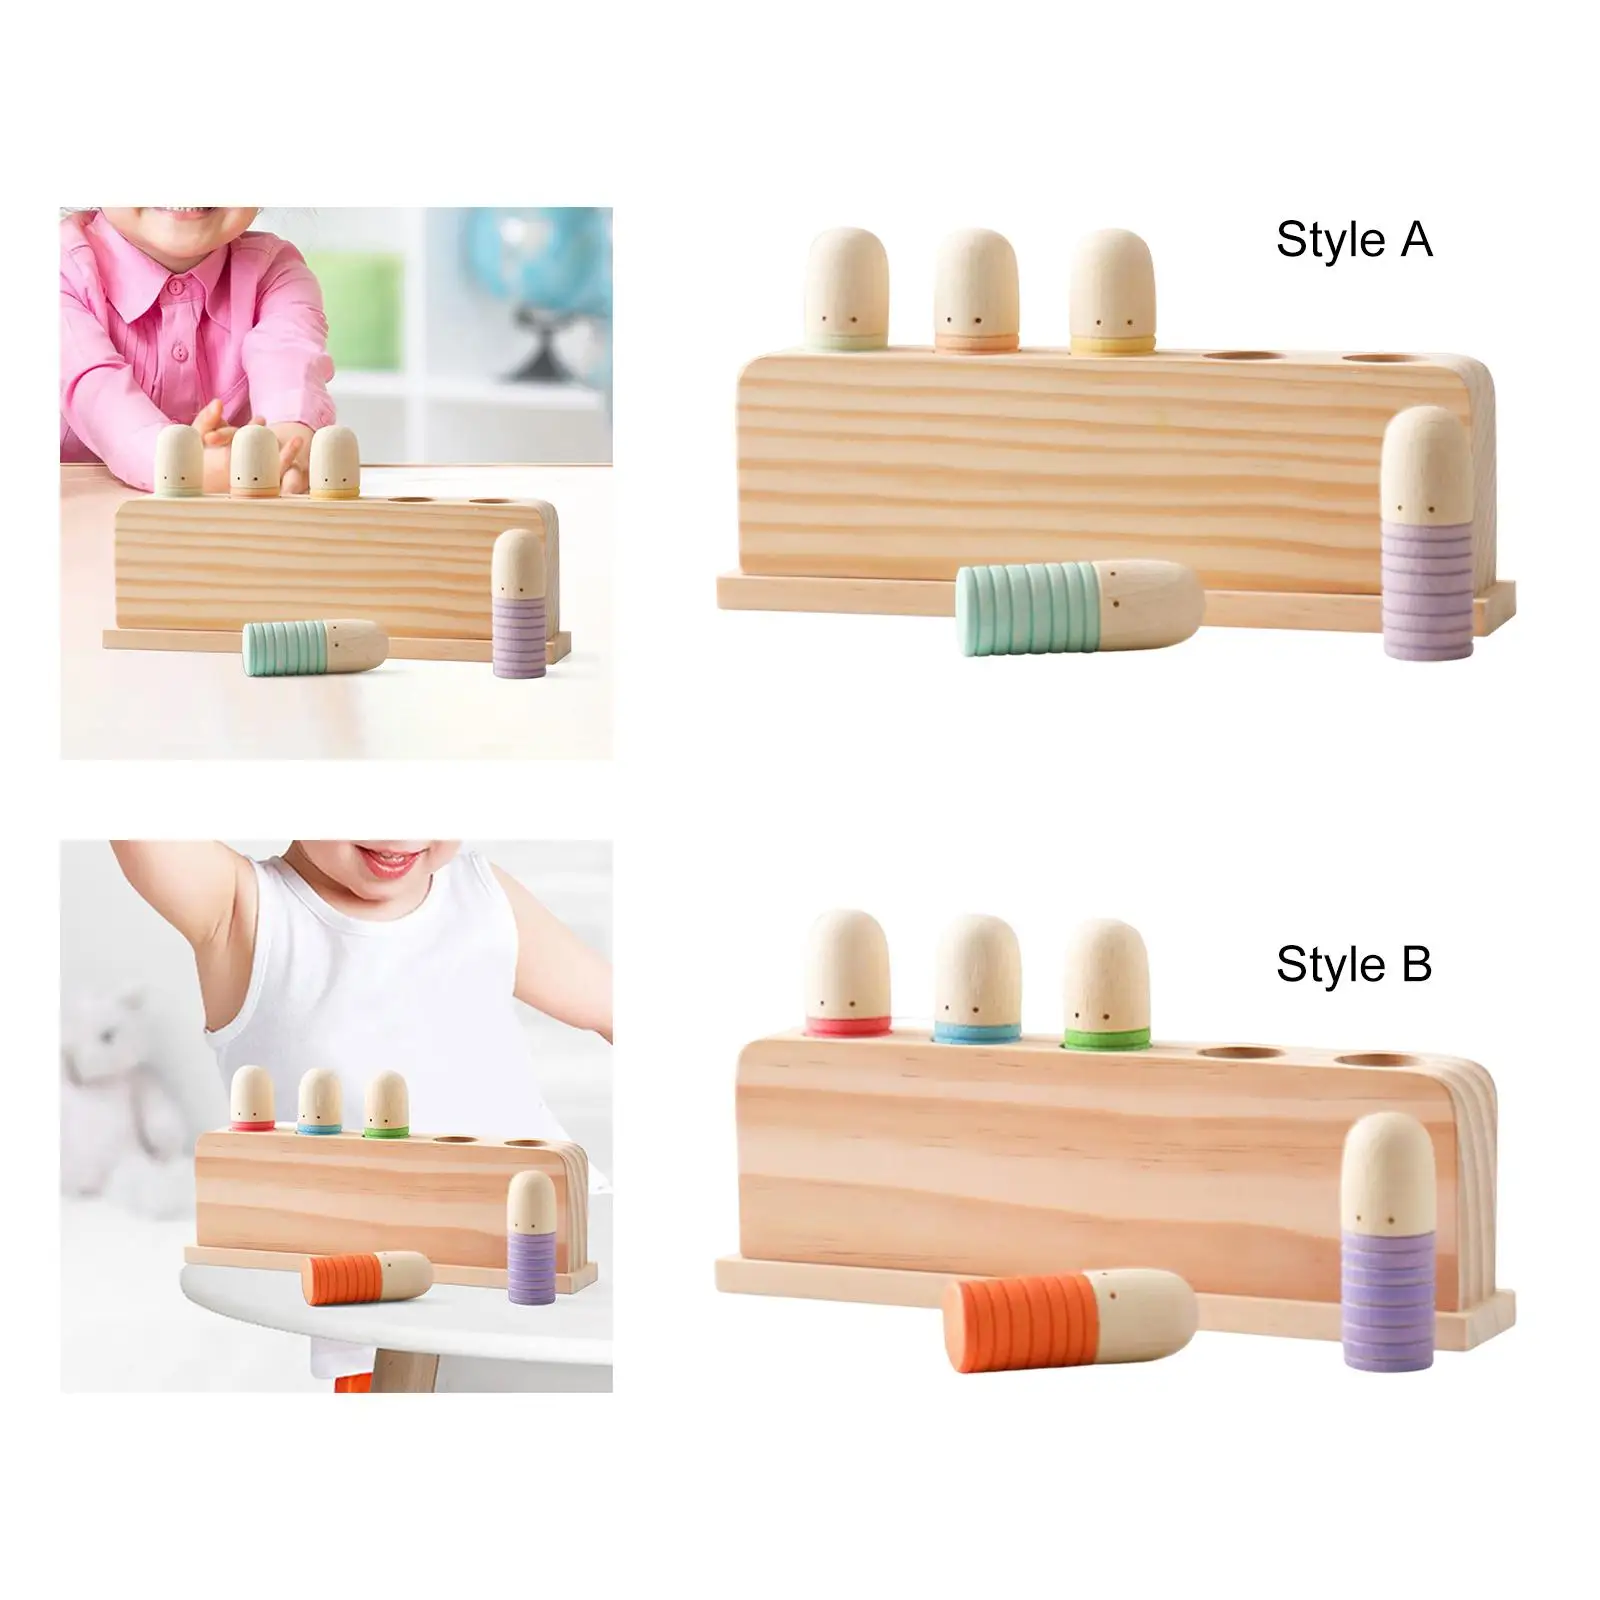 Wooden Rainbow Peg Dolls Shapes Sorting Toys, 5 Wood People Figures Cylinder Blocks for Kids Birthday Gifts